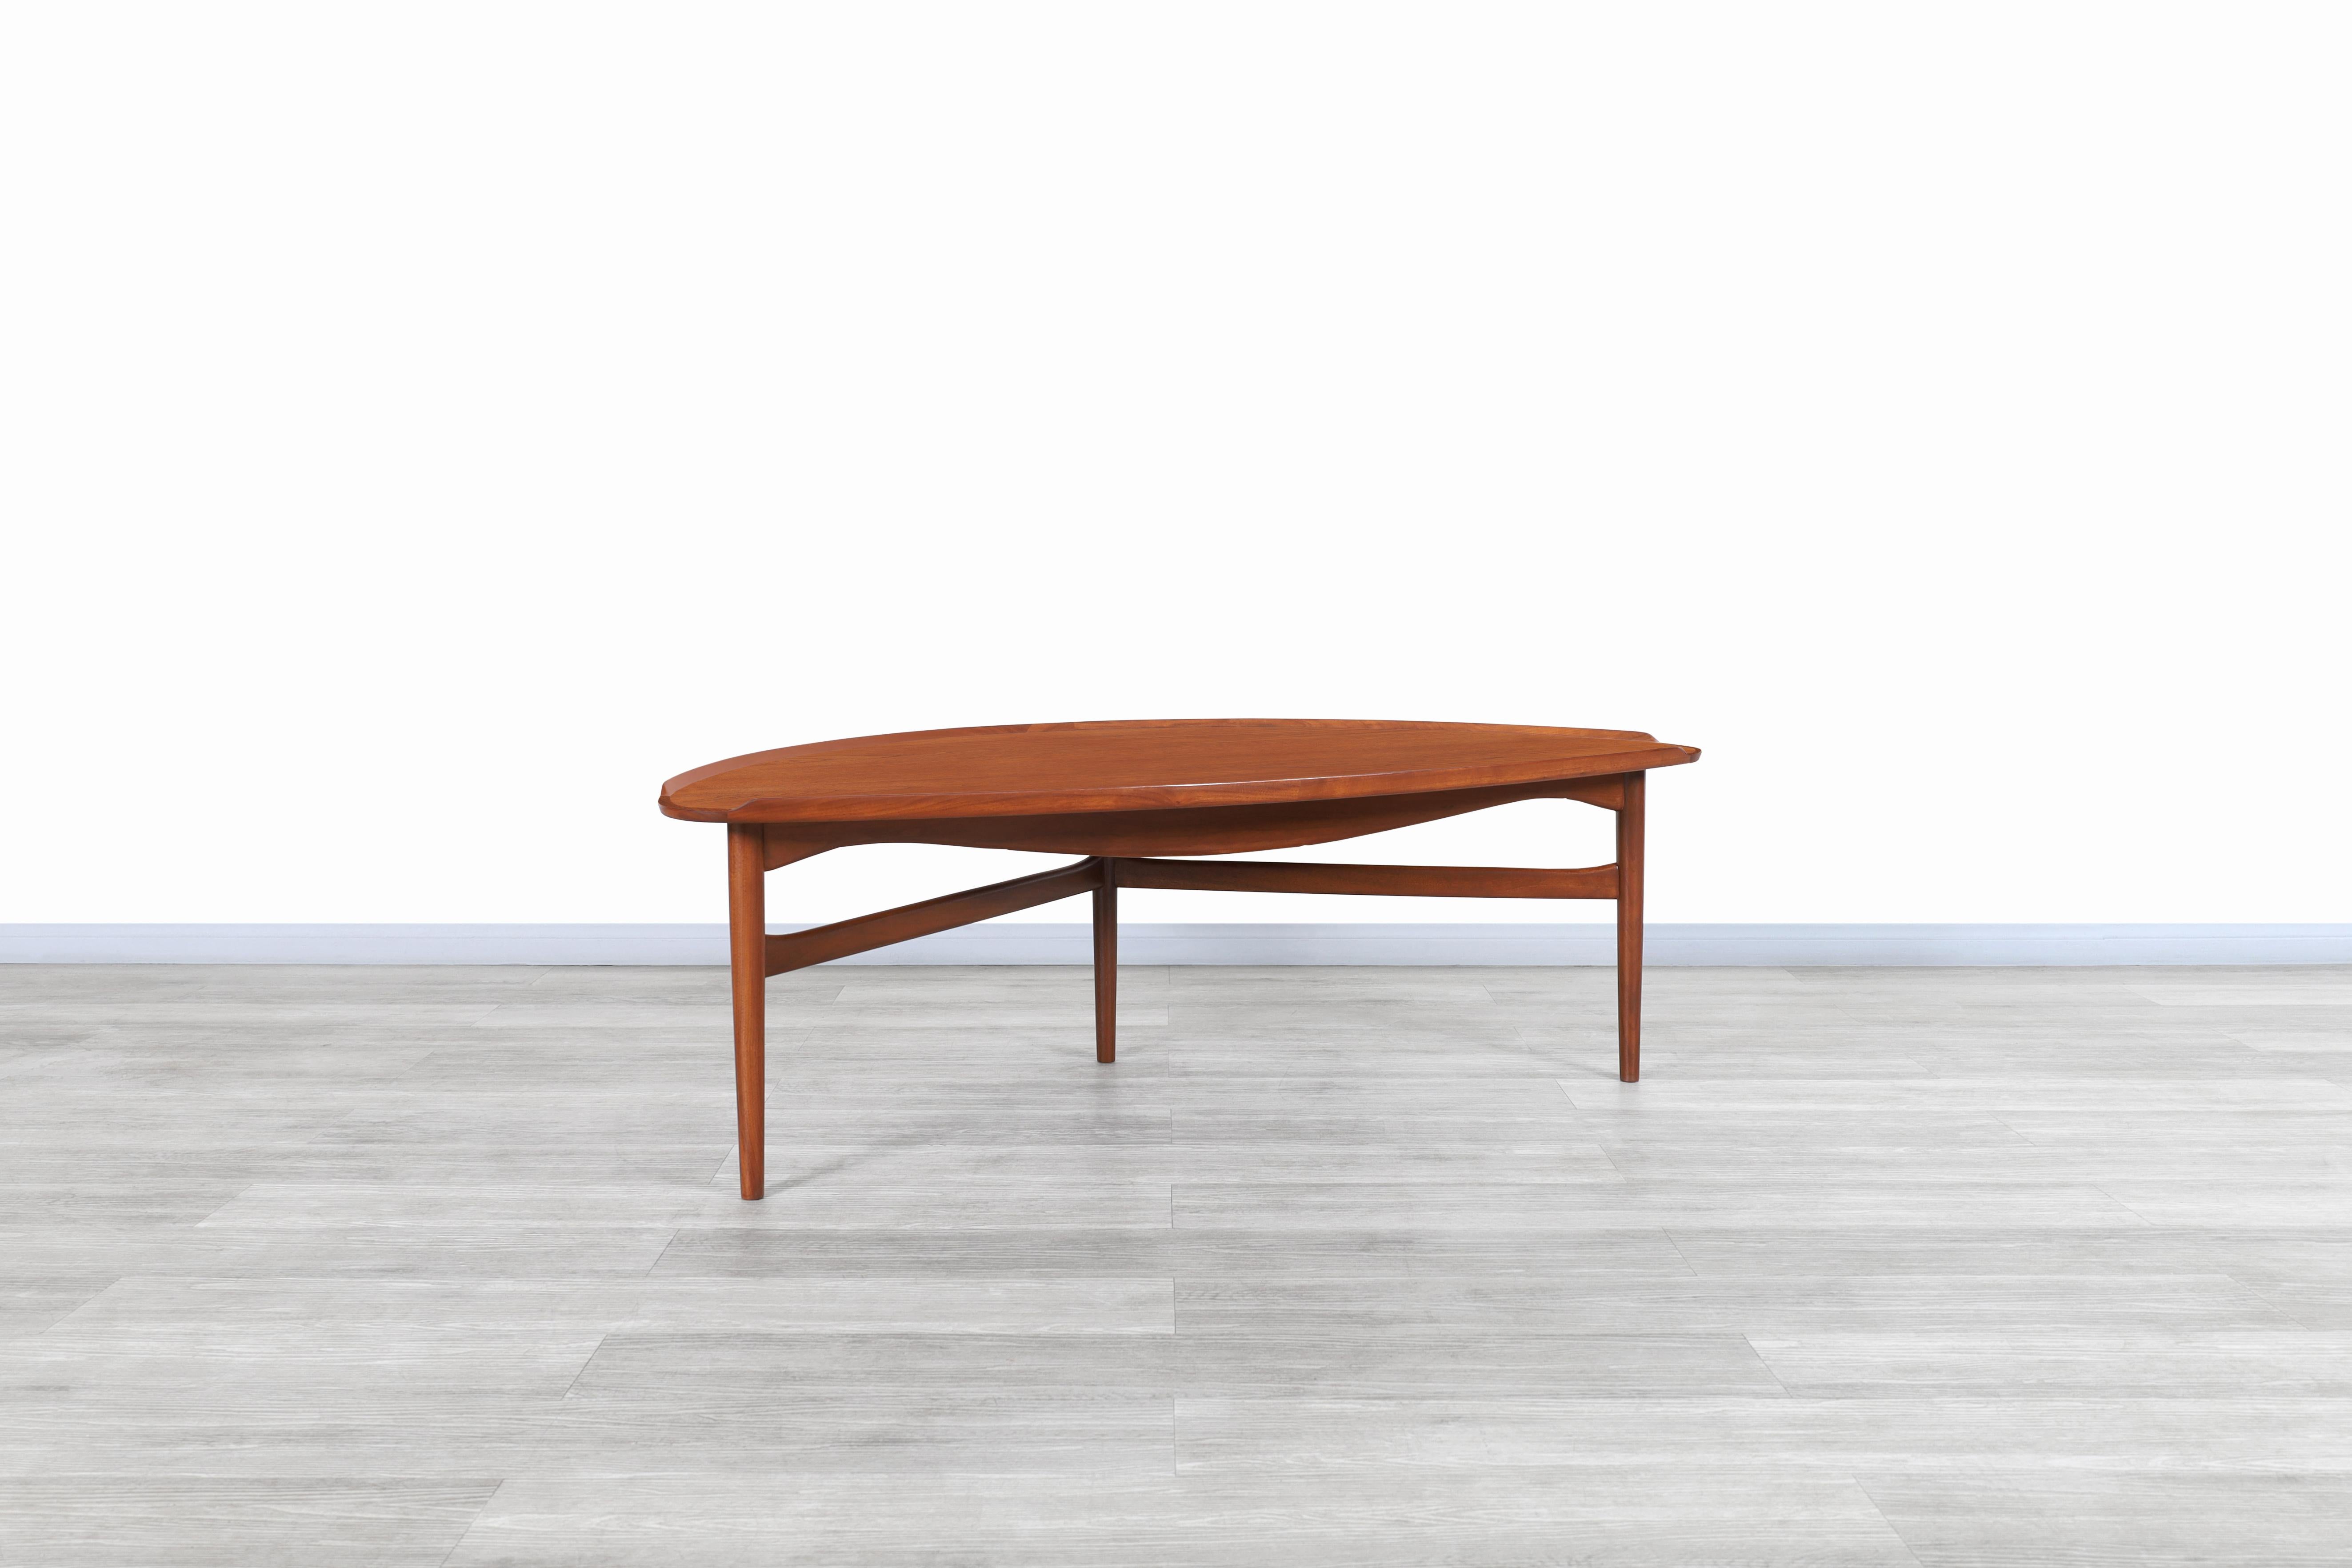 Exceptional Danish modern teak cocktail table designed by iconic designer Finn Juhl for Baker Furniture in the United States, circa 1950s. This cocktail table has a sculptural design with no sharp corners that allow you to move freely around it. It